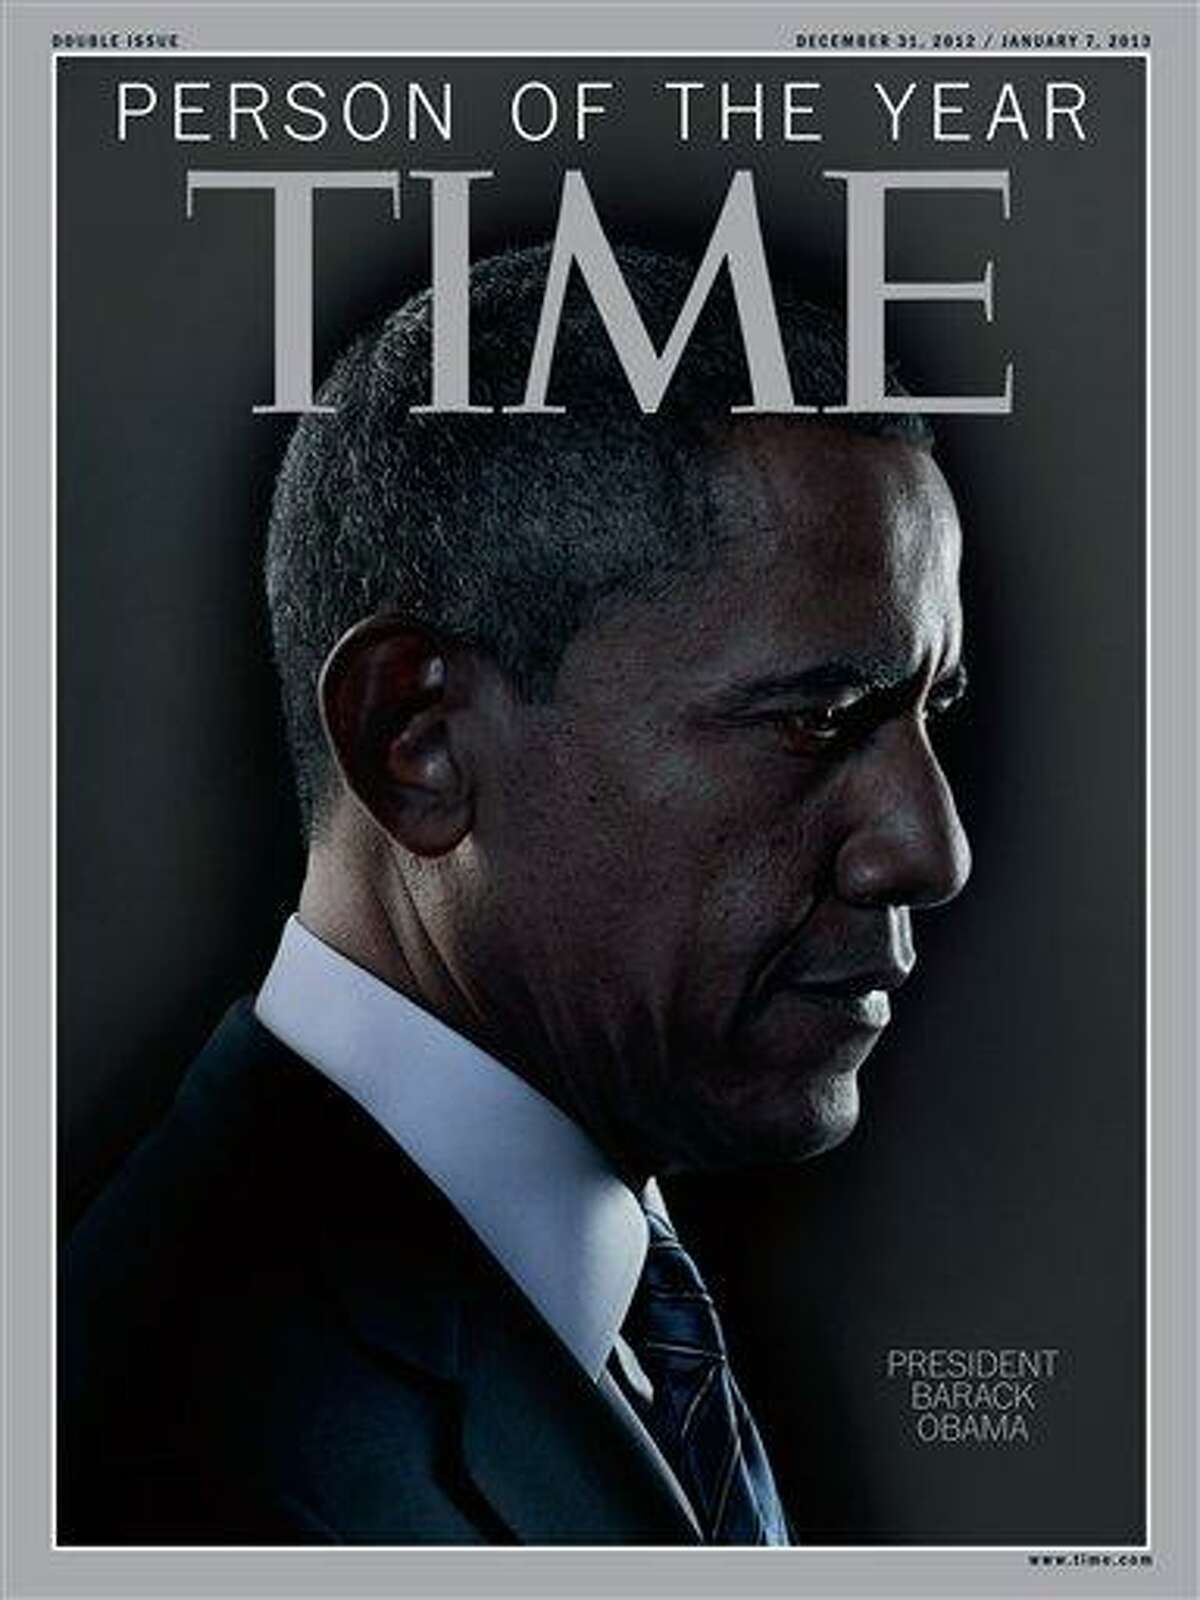 President Barack Obama is Time Magazine's Person of the Year. The selection was announced Wednesday on NBC's "Today" show. The short list for the honor included Malala Yousafzai, the Pakistani teenager who was shot in the head for advocating for girls' education. It also included Egyptian president Mohamed Morsi, Apple CEO Tim Cook and Italian physicist Fabiola Giannati. Obama also received the honor in 2008, when he was President-elect. Last year, "The Protester" got the honor. AP Photo/Time Magazine